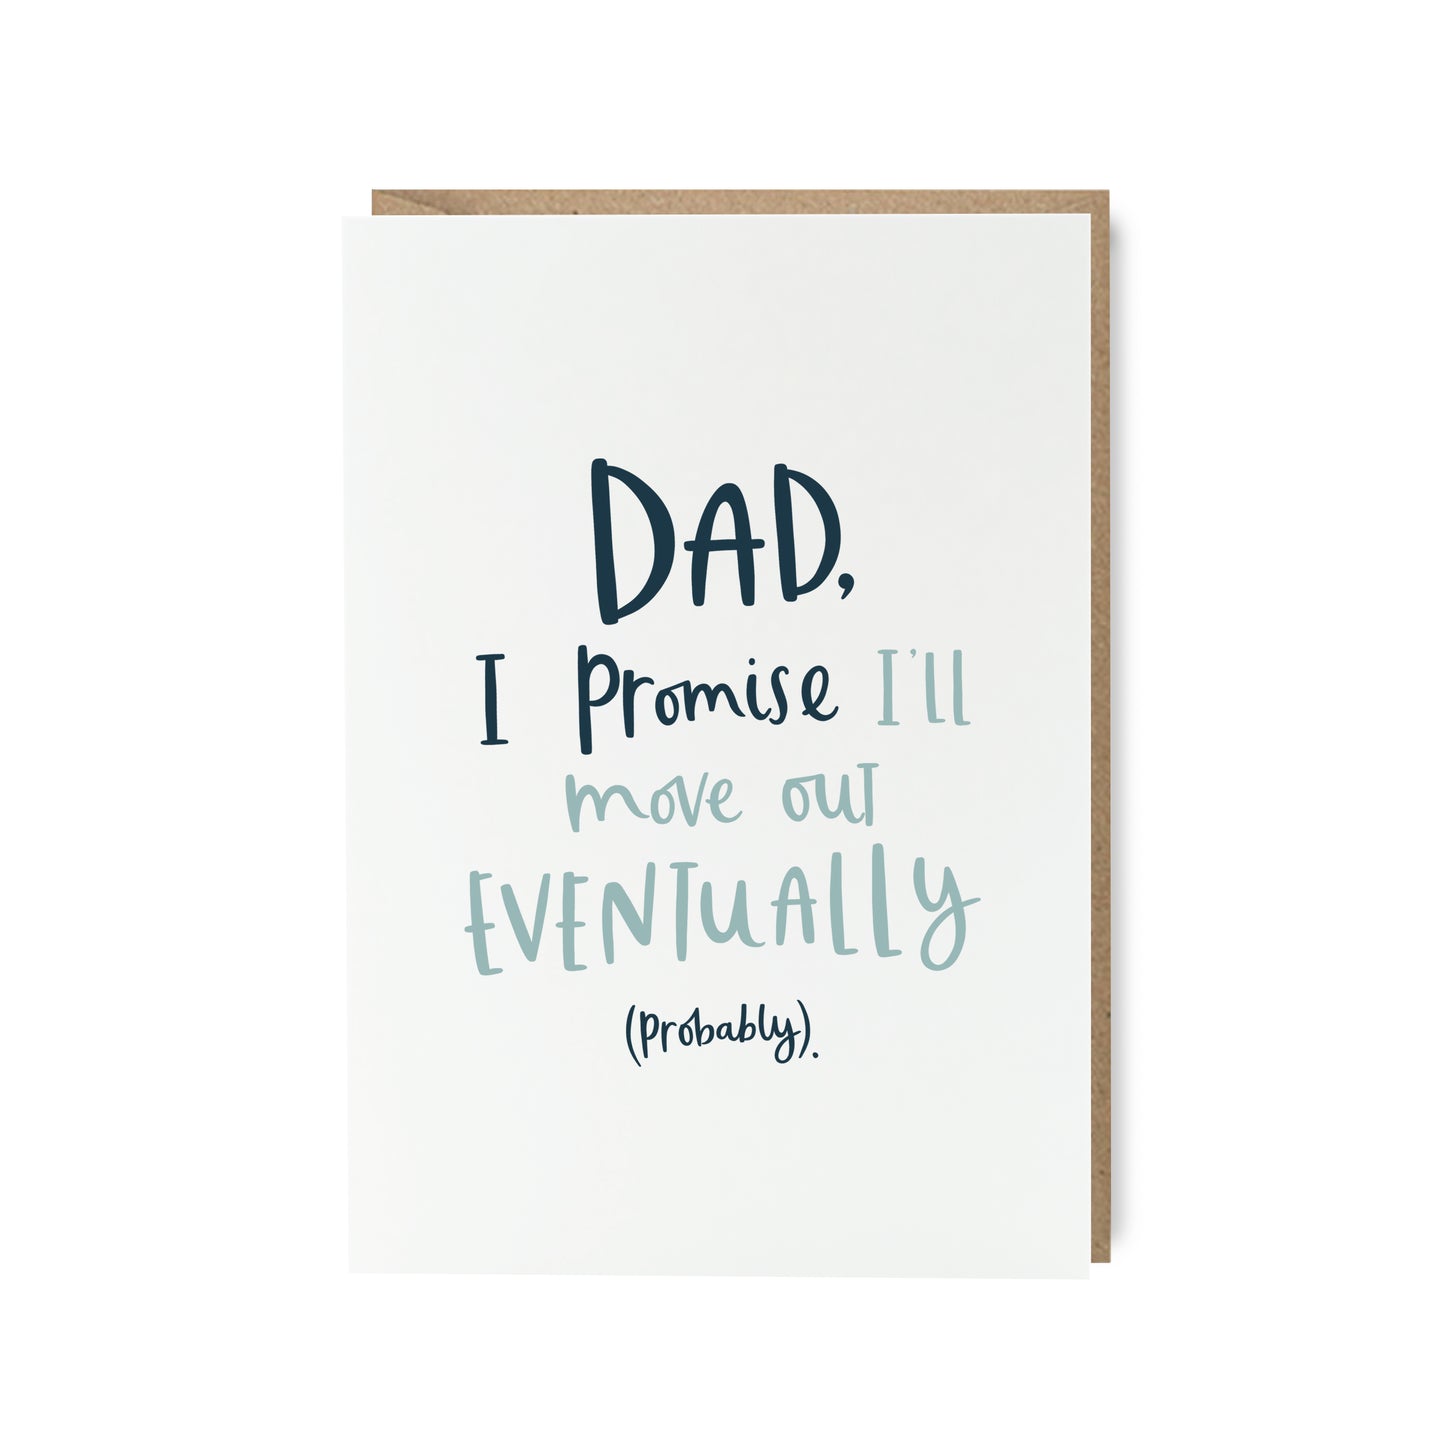 Dad, promise I'll move out funny father's day card by Abbie Imagine